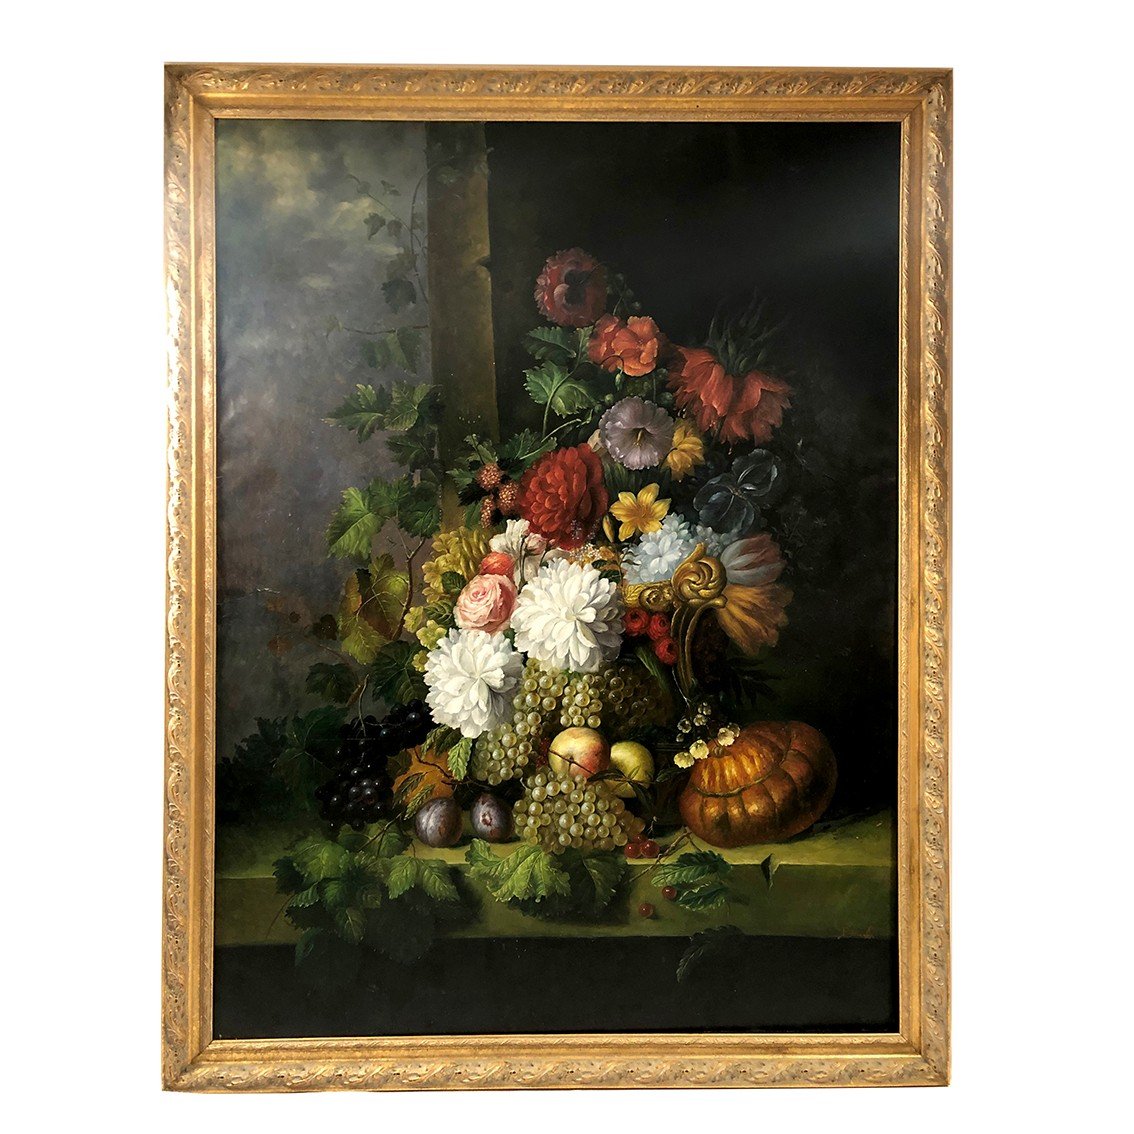 Peter Brooks. Huge Still Life With Flowers And Fruits. Oil On Canvas 20th Century. 2.2mx 1.7m